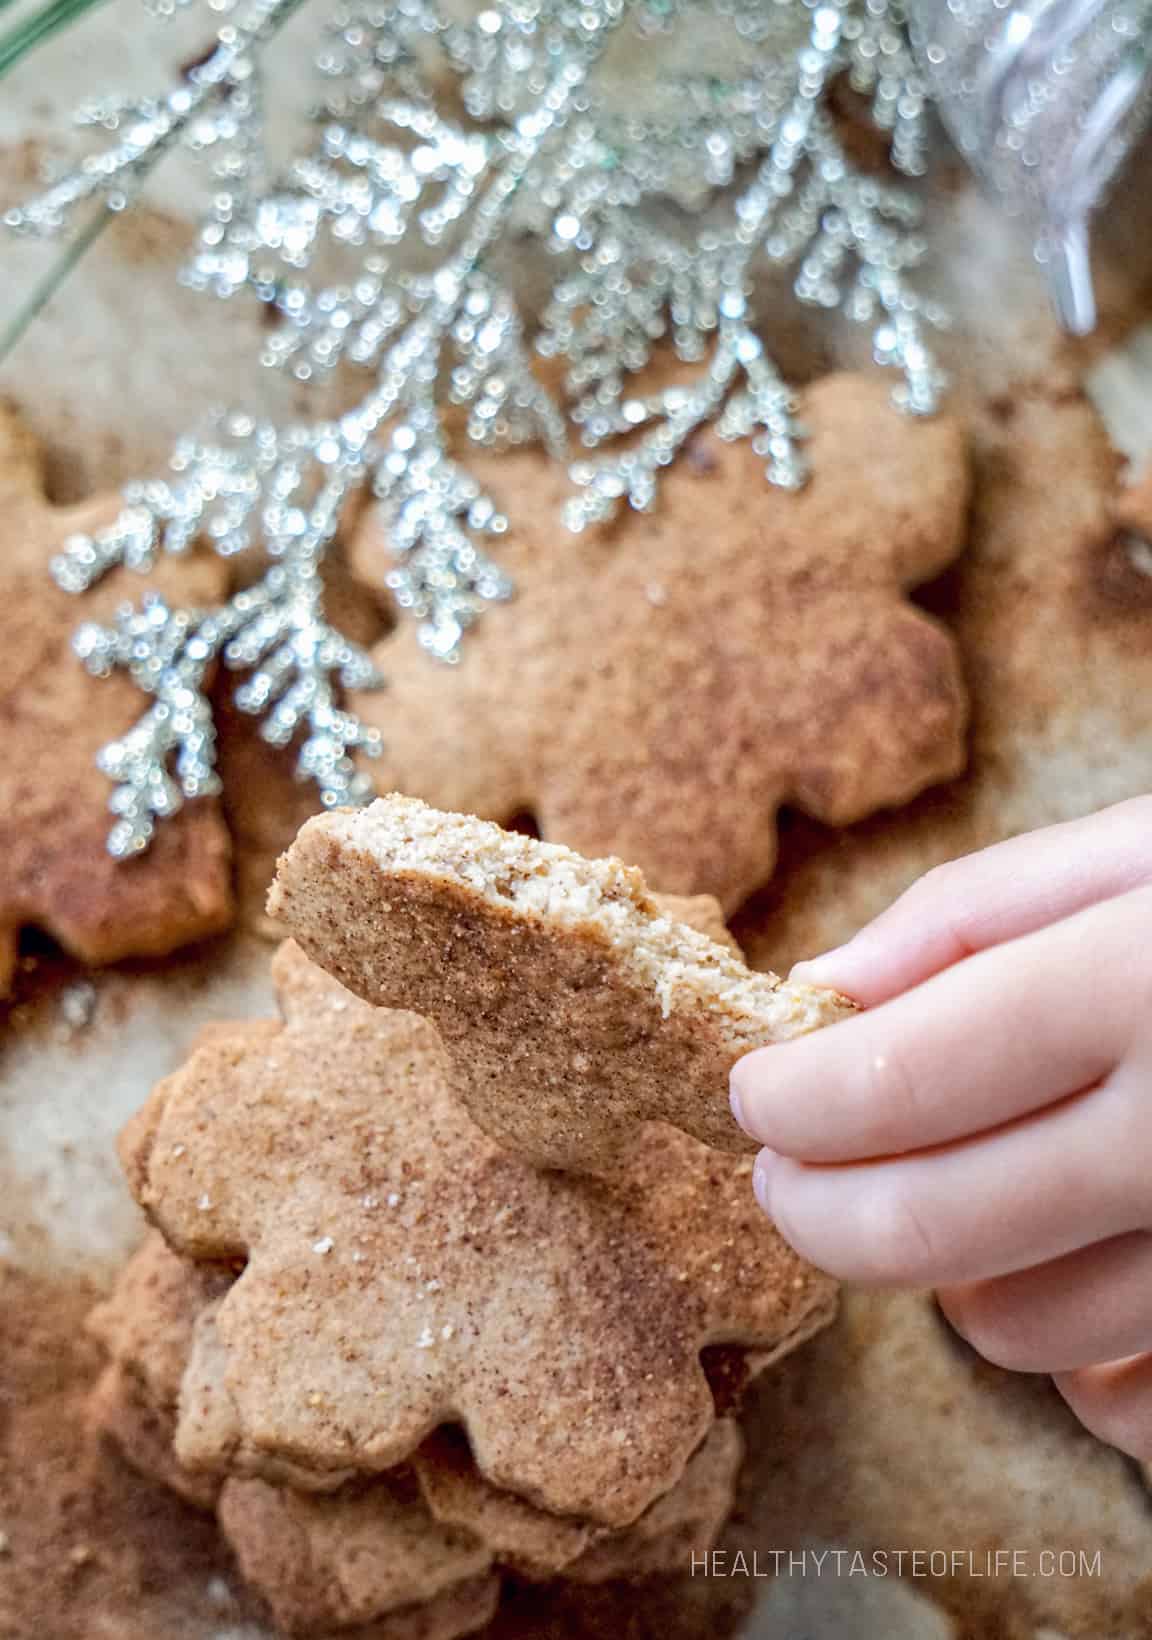 Gluten free sugar cookie recipe with cinnamon, walnut and maple flavor! These gluten free vegan cookies are crisp, crumbly, dairy free, no eggs just healthy gluten free vegan maple sugar cookies.